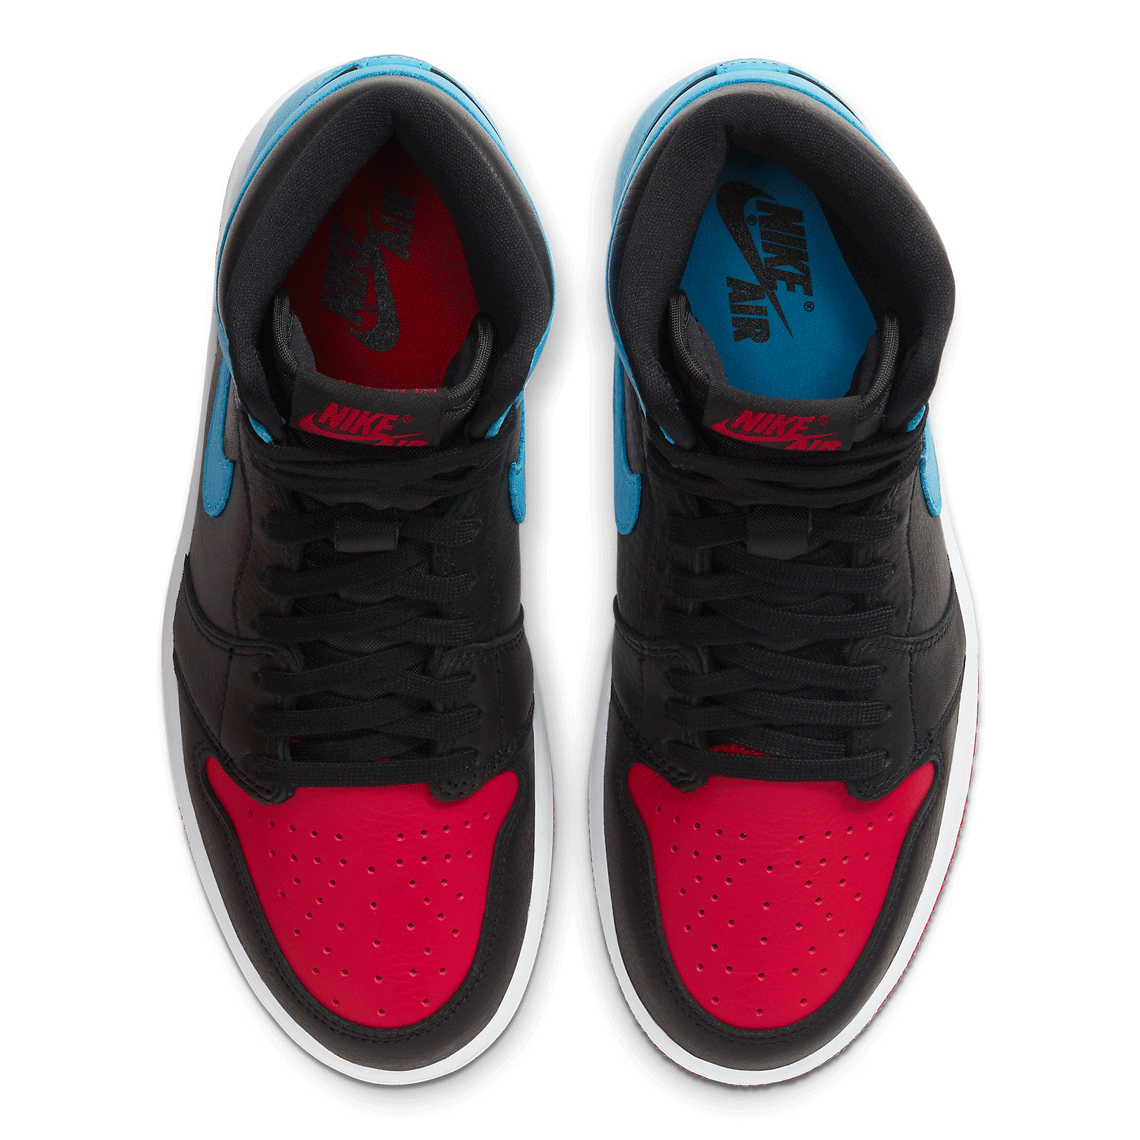 jordan air why not zer0 2 se launches into red orbit Retro High Og Unc To Chi Cd0461 046 1